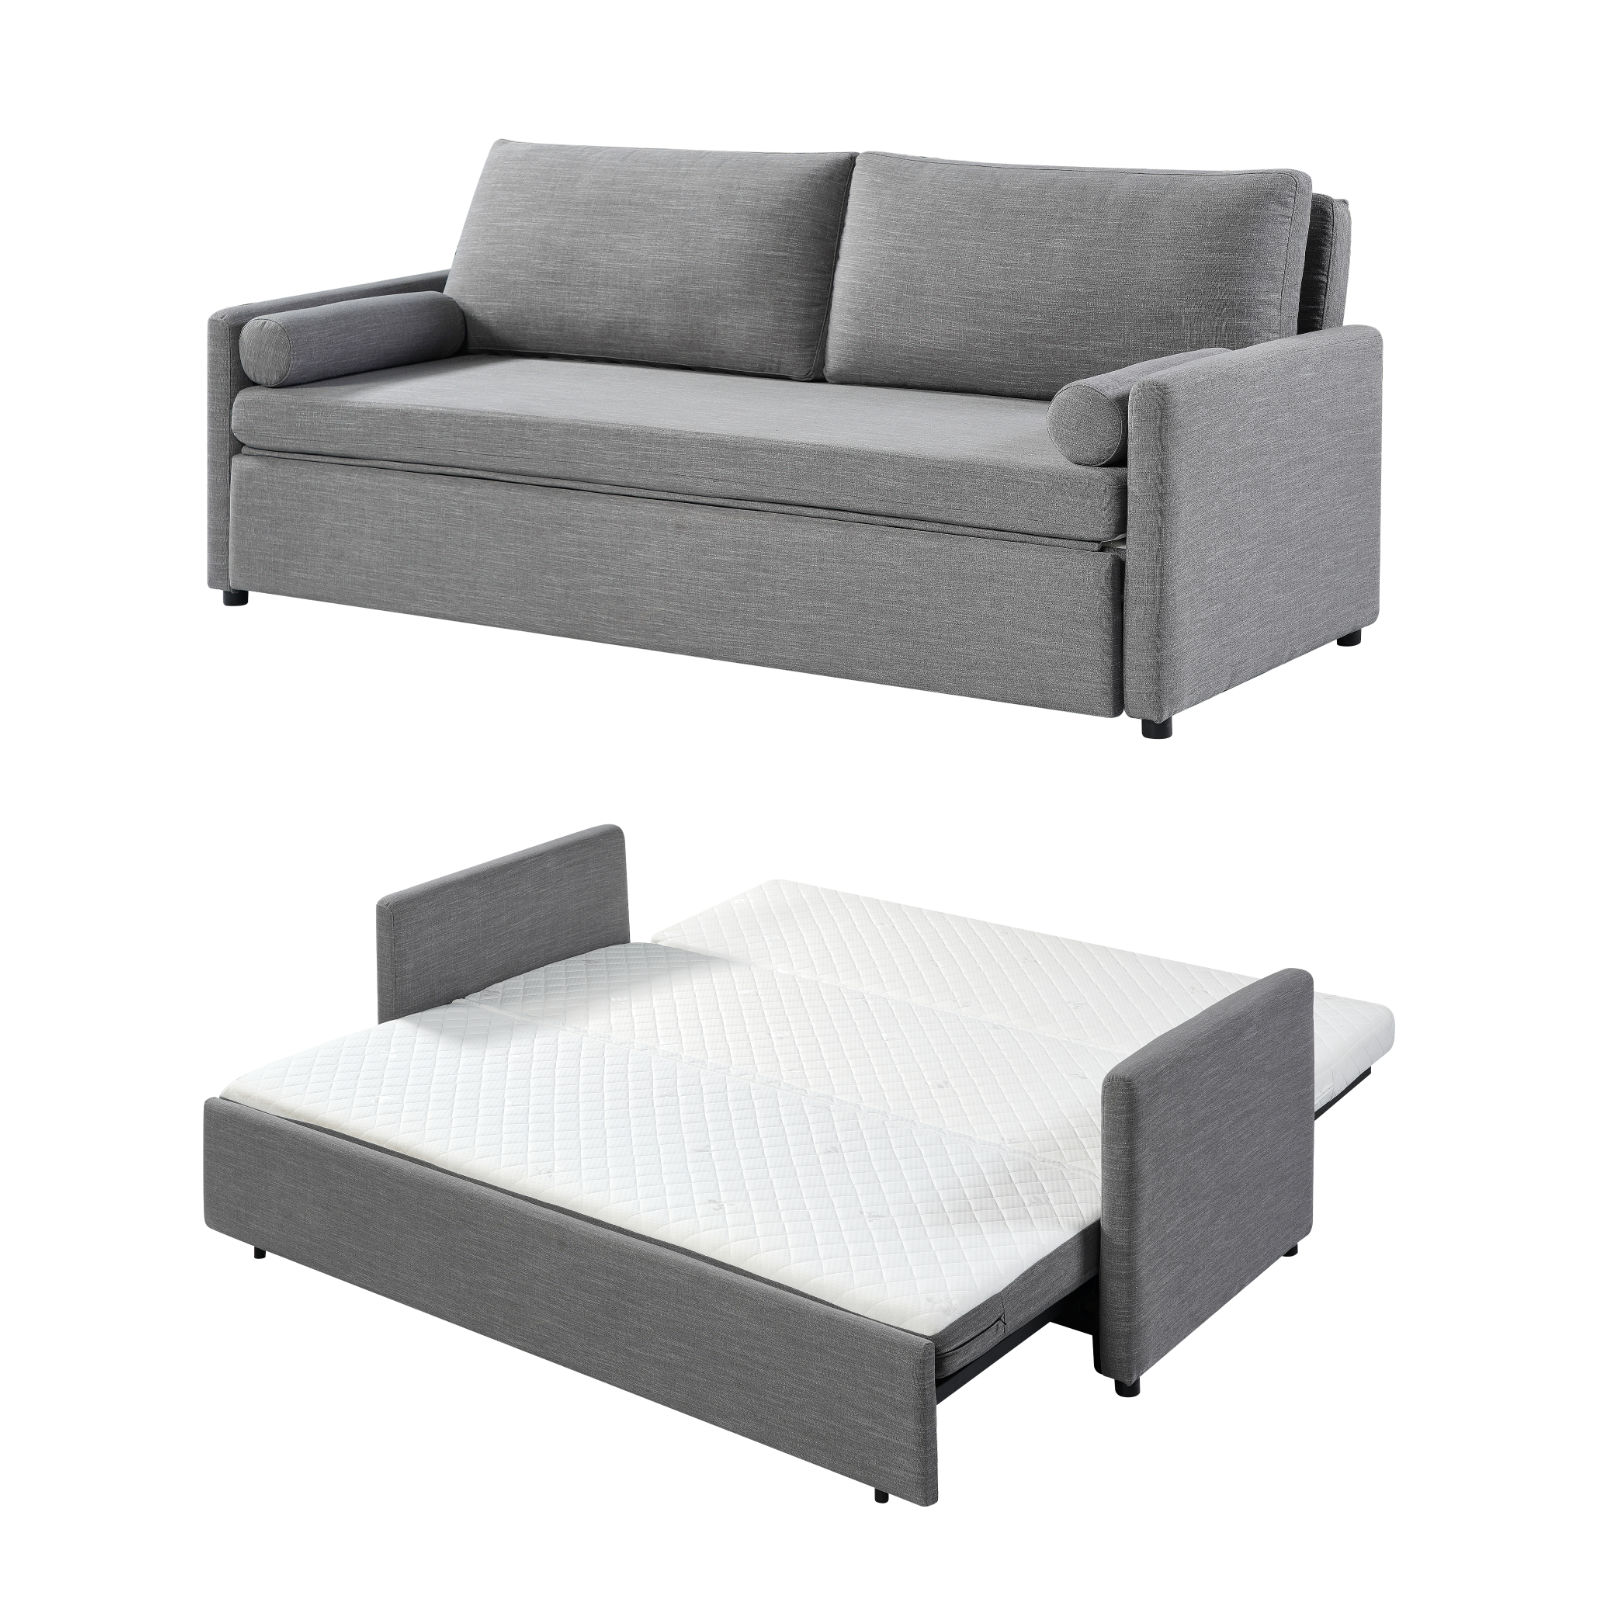 Harmony - King Sofa bed with Memory - Expand Furniture Folding Smarter Wall Beds, Space